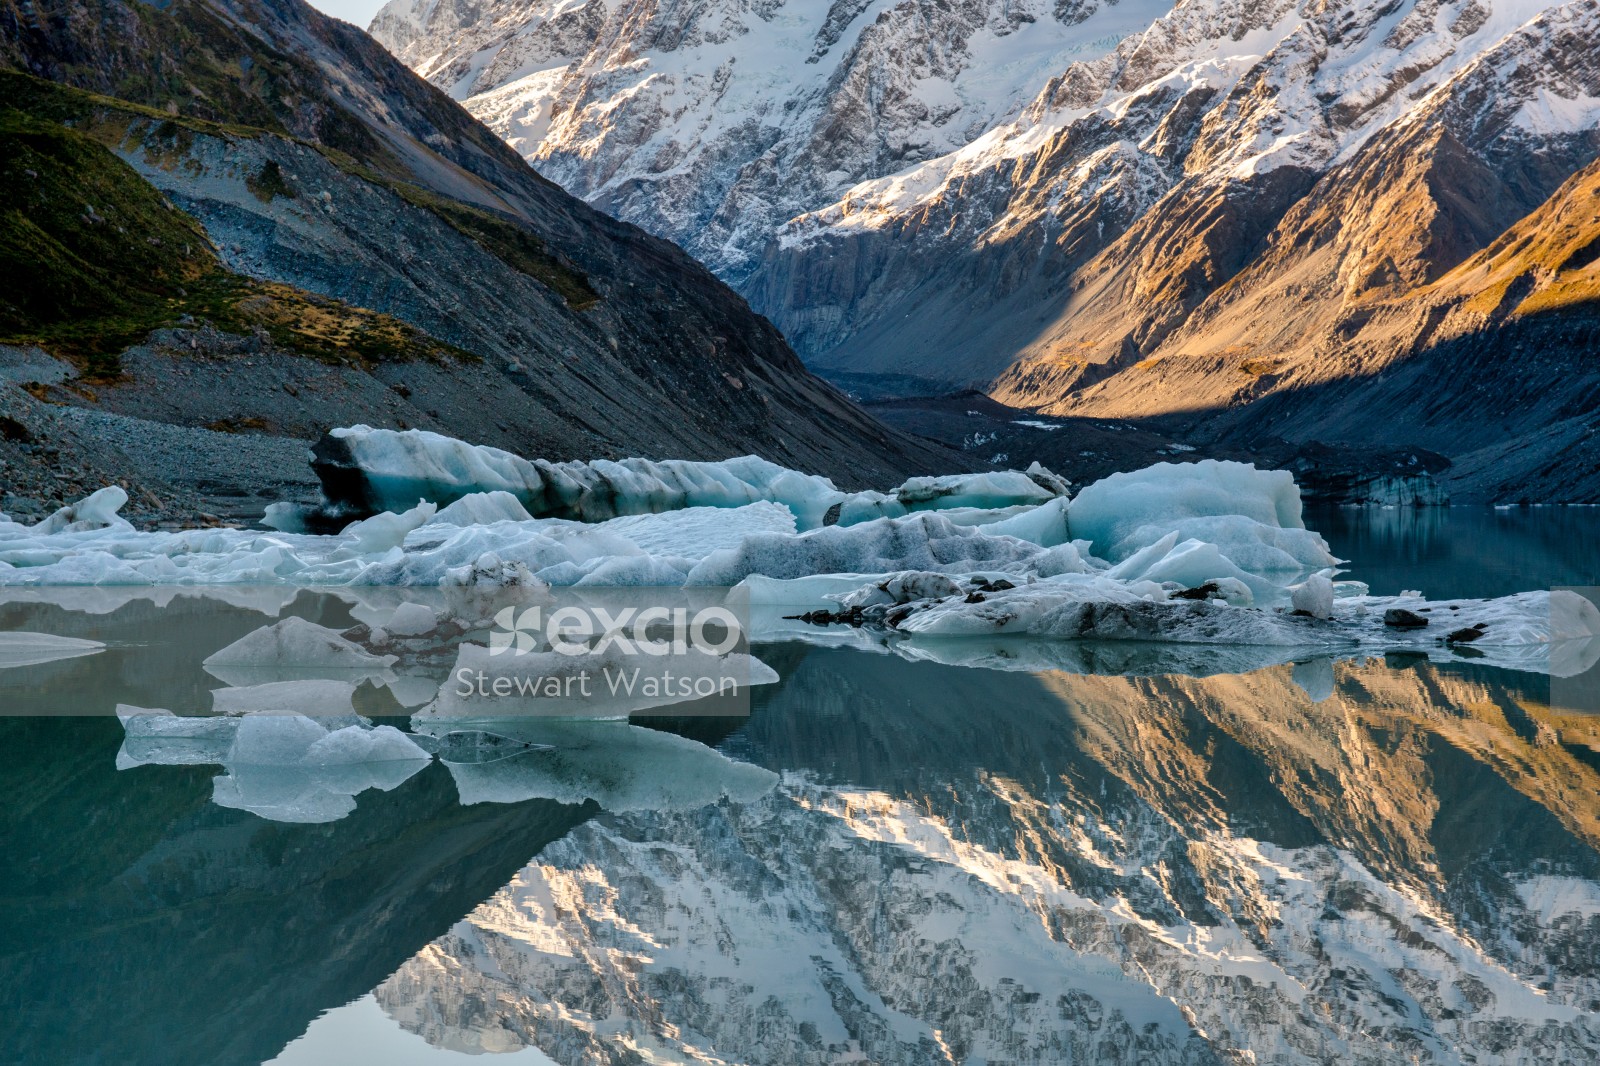 Hooker valley Lake and its icebergs zoom